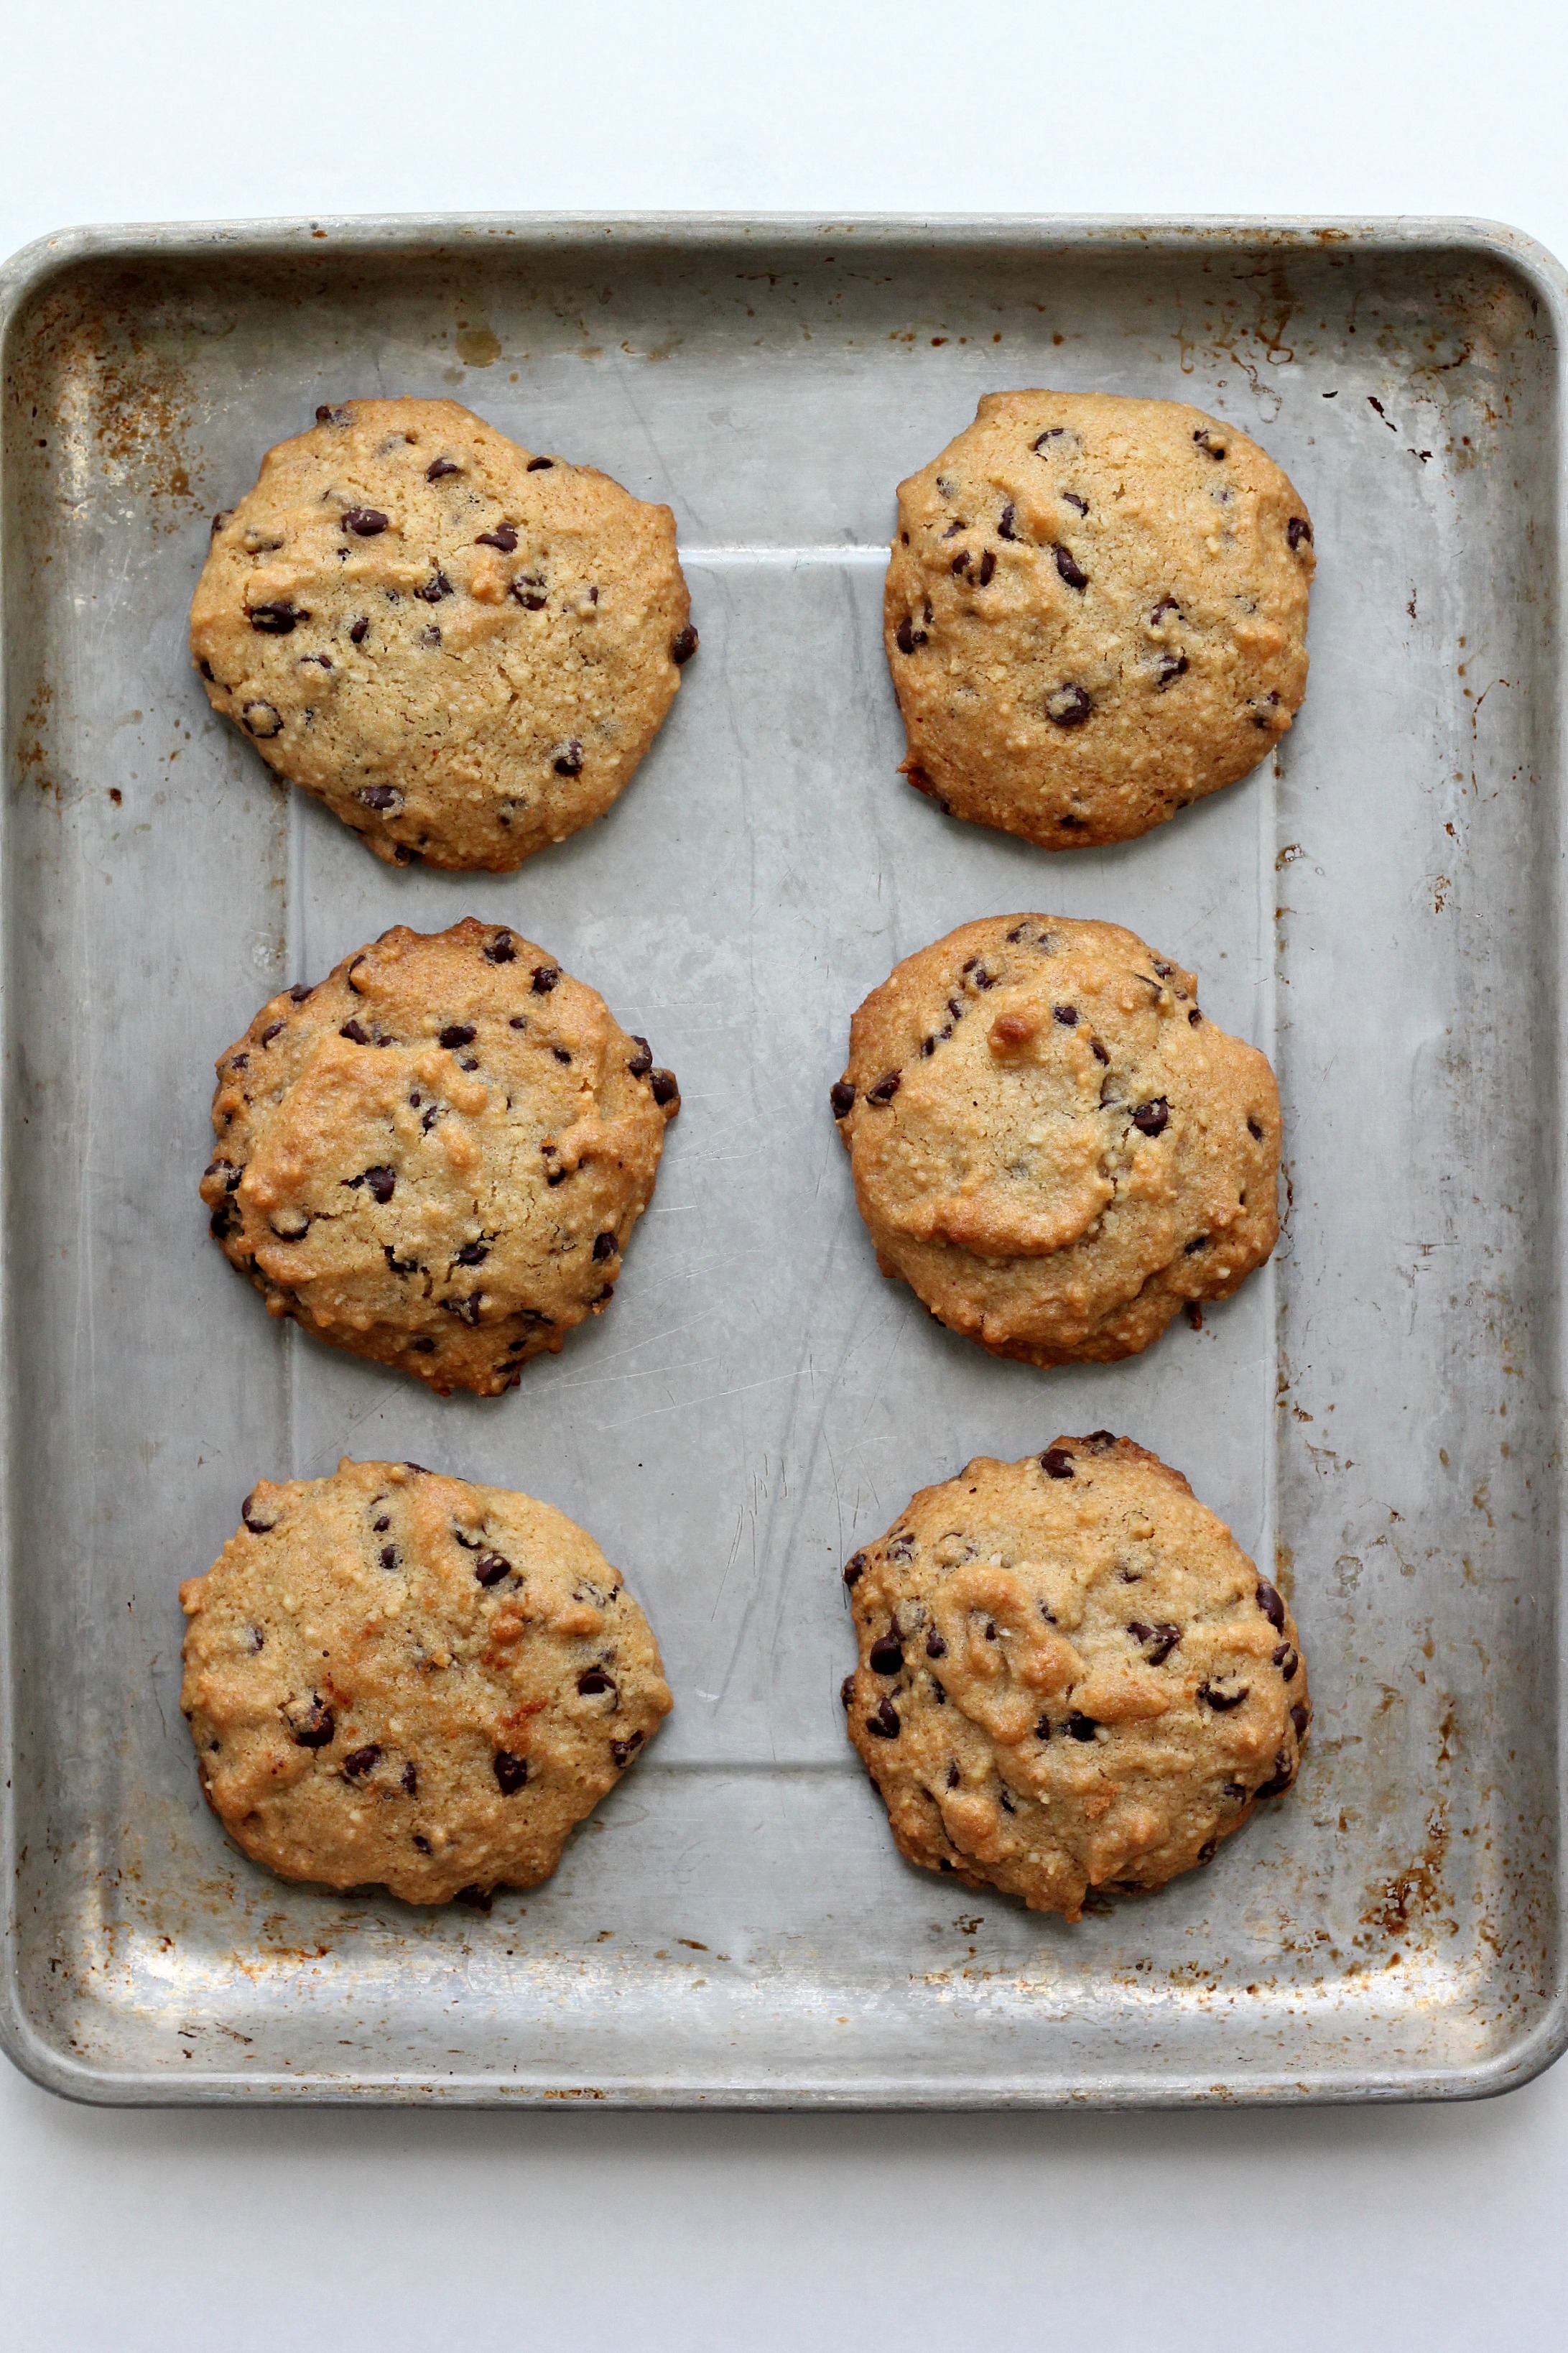 Paleo Chocolate Chip Cookies – from Make it Paleo